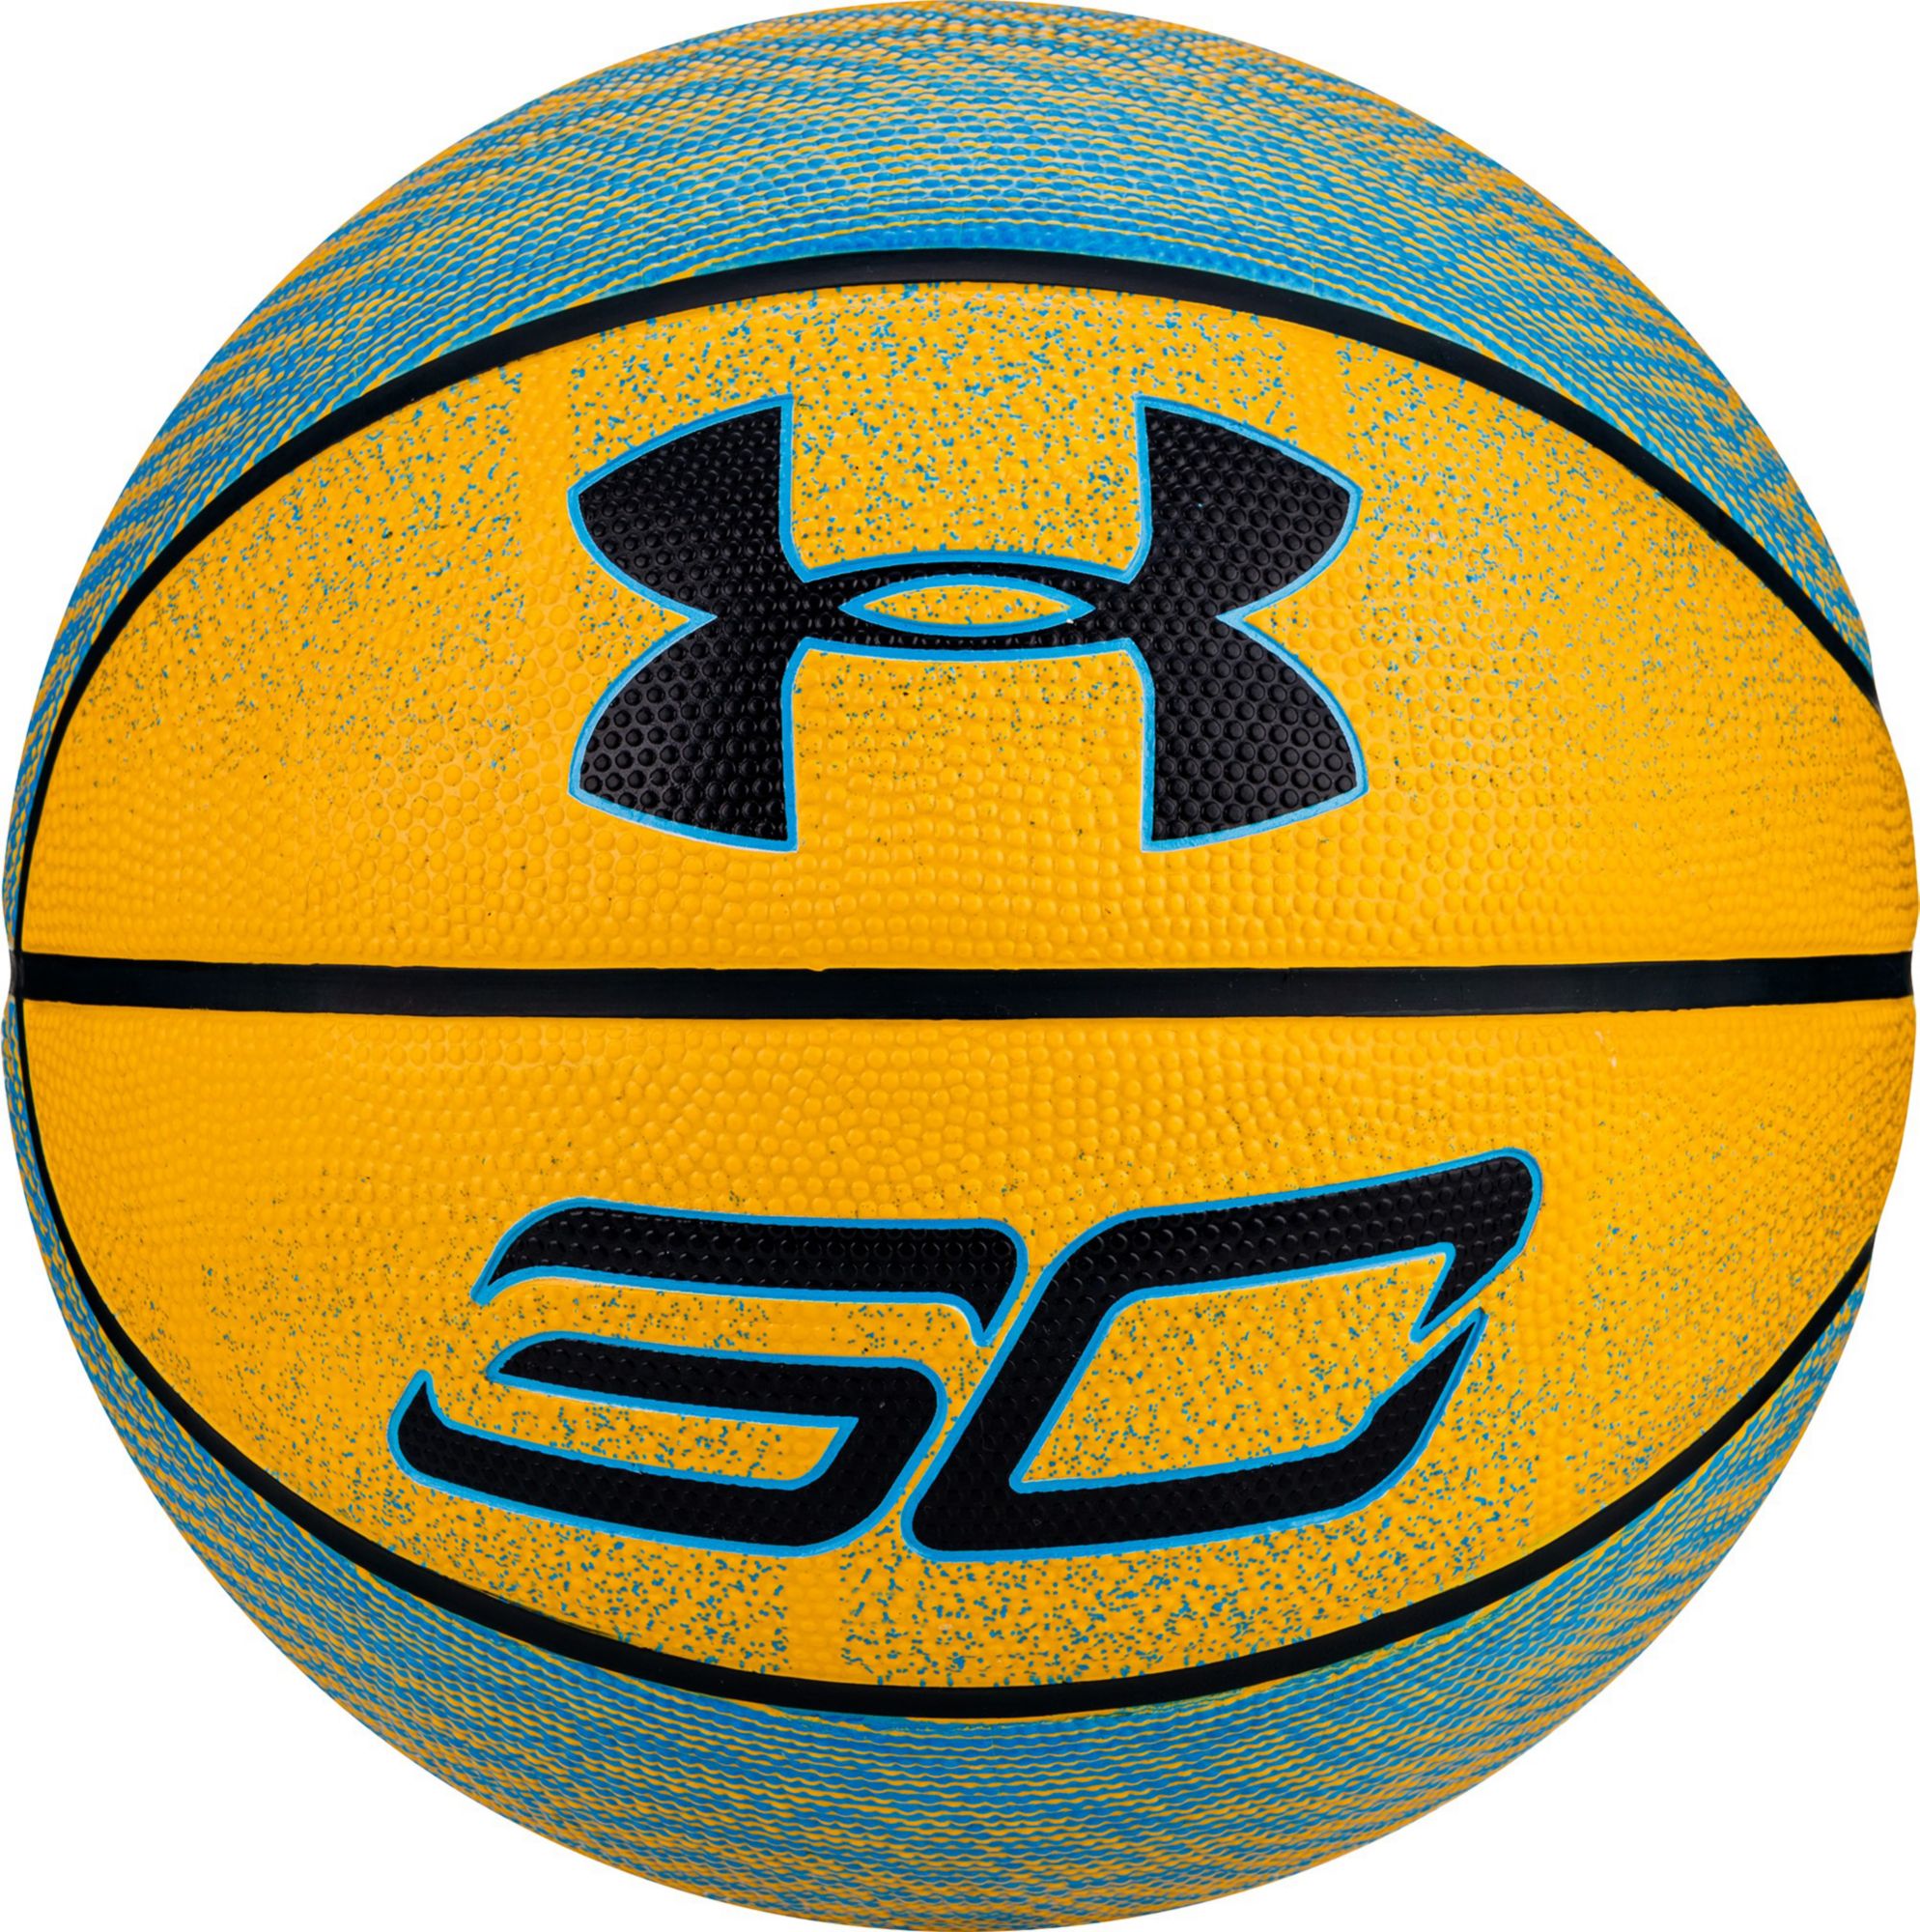 Under Armour Curry Youth Basketball (27 